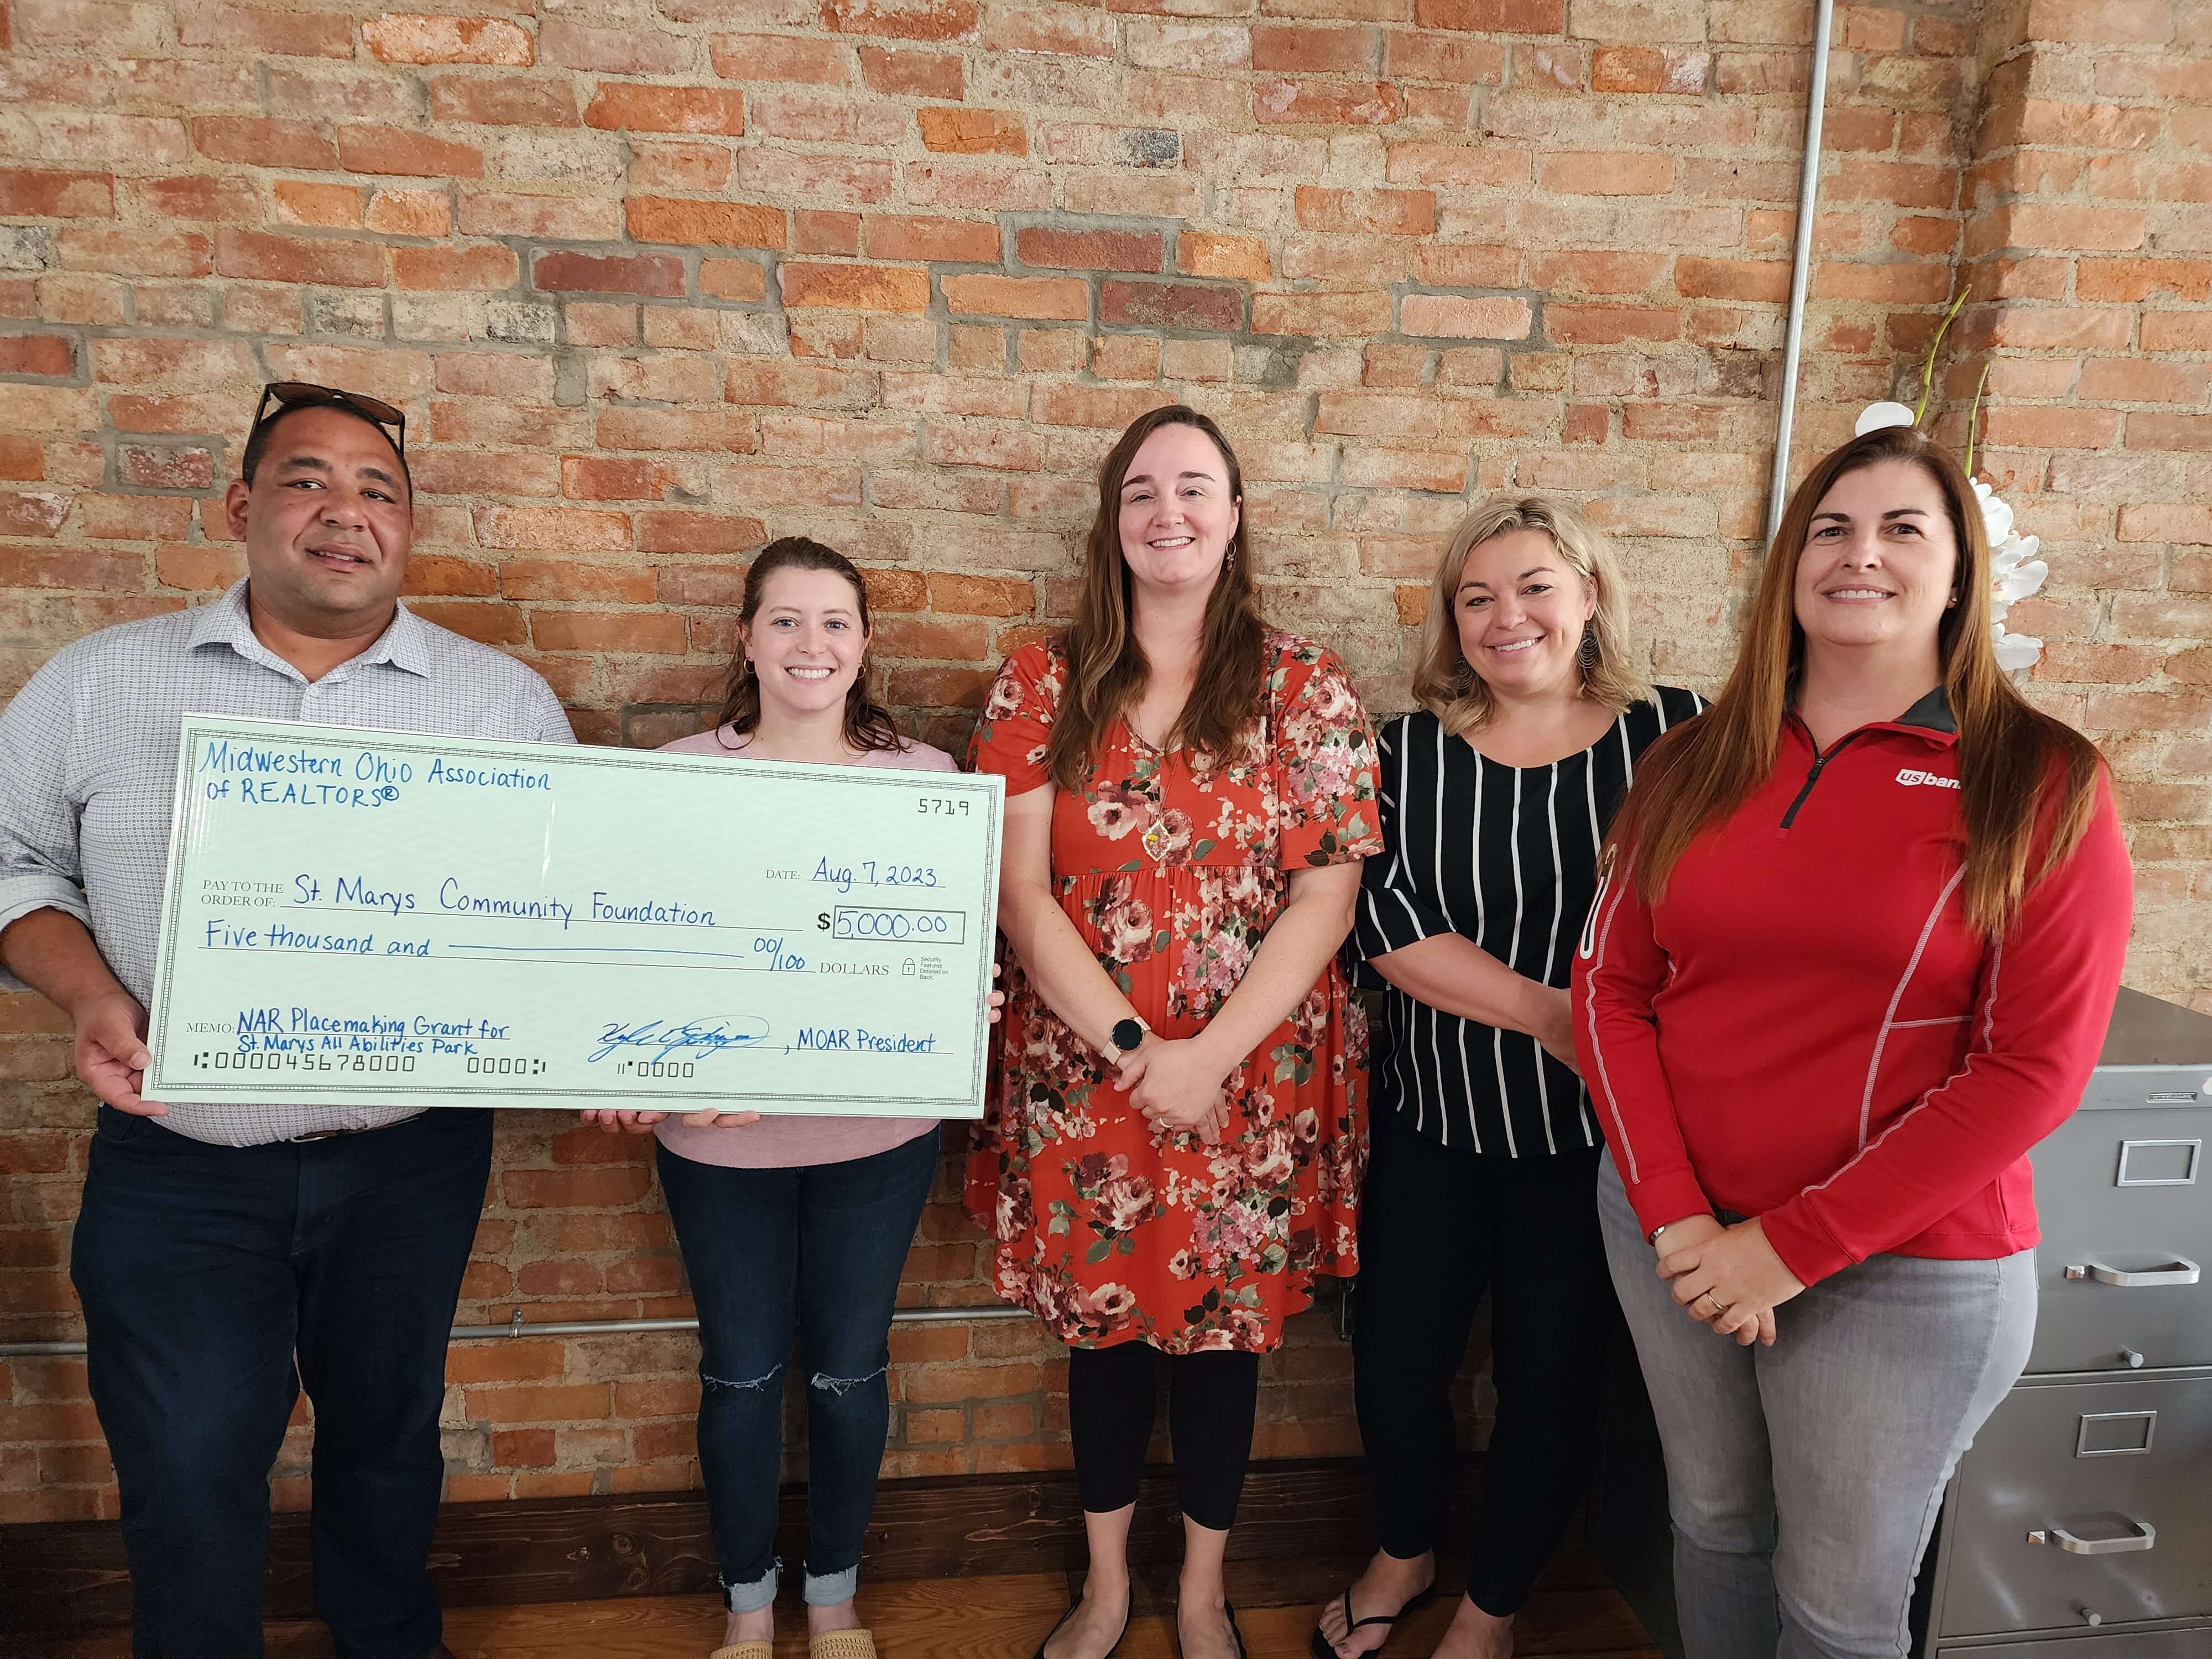 MOAR President, Kyle Springs, presents check to Ashley Randolph for St. Marys Community Foundation for the St. Marys All Abilities Park project along with MOAR Association Executive, Megan Wise, MOAR Director, Krista Hubbell, and MOAR Affiliate Member and supporter of the project, Amy Frilling